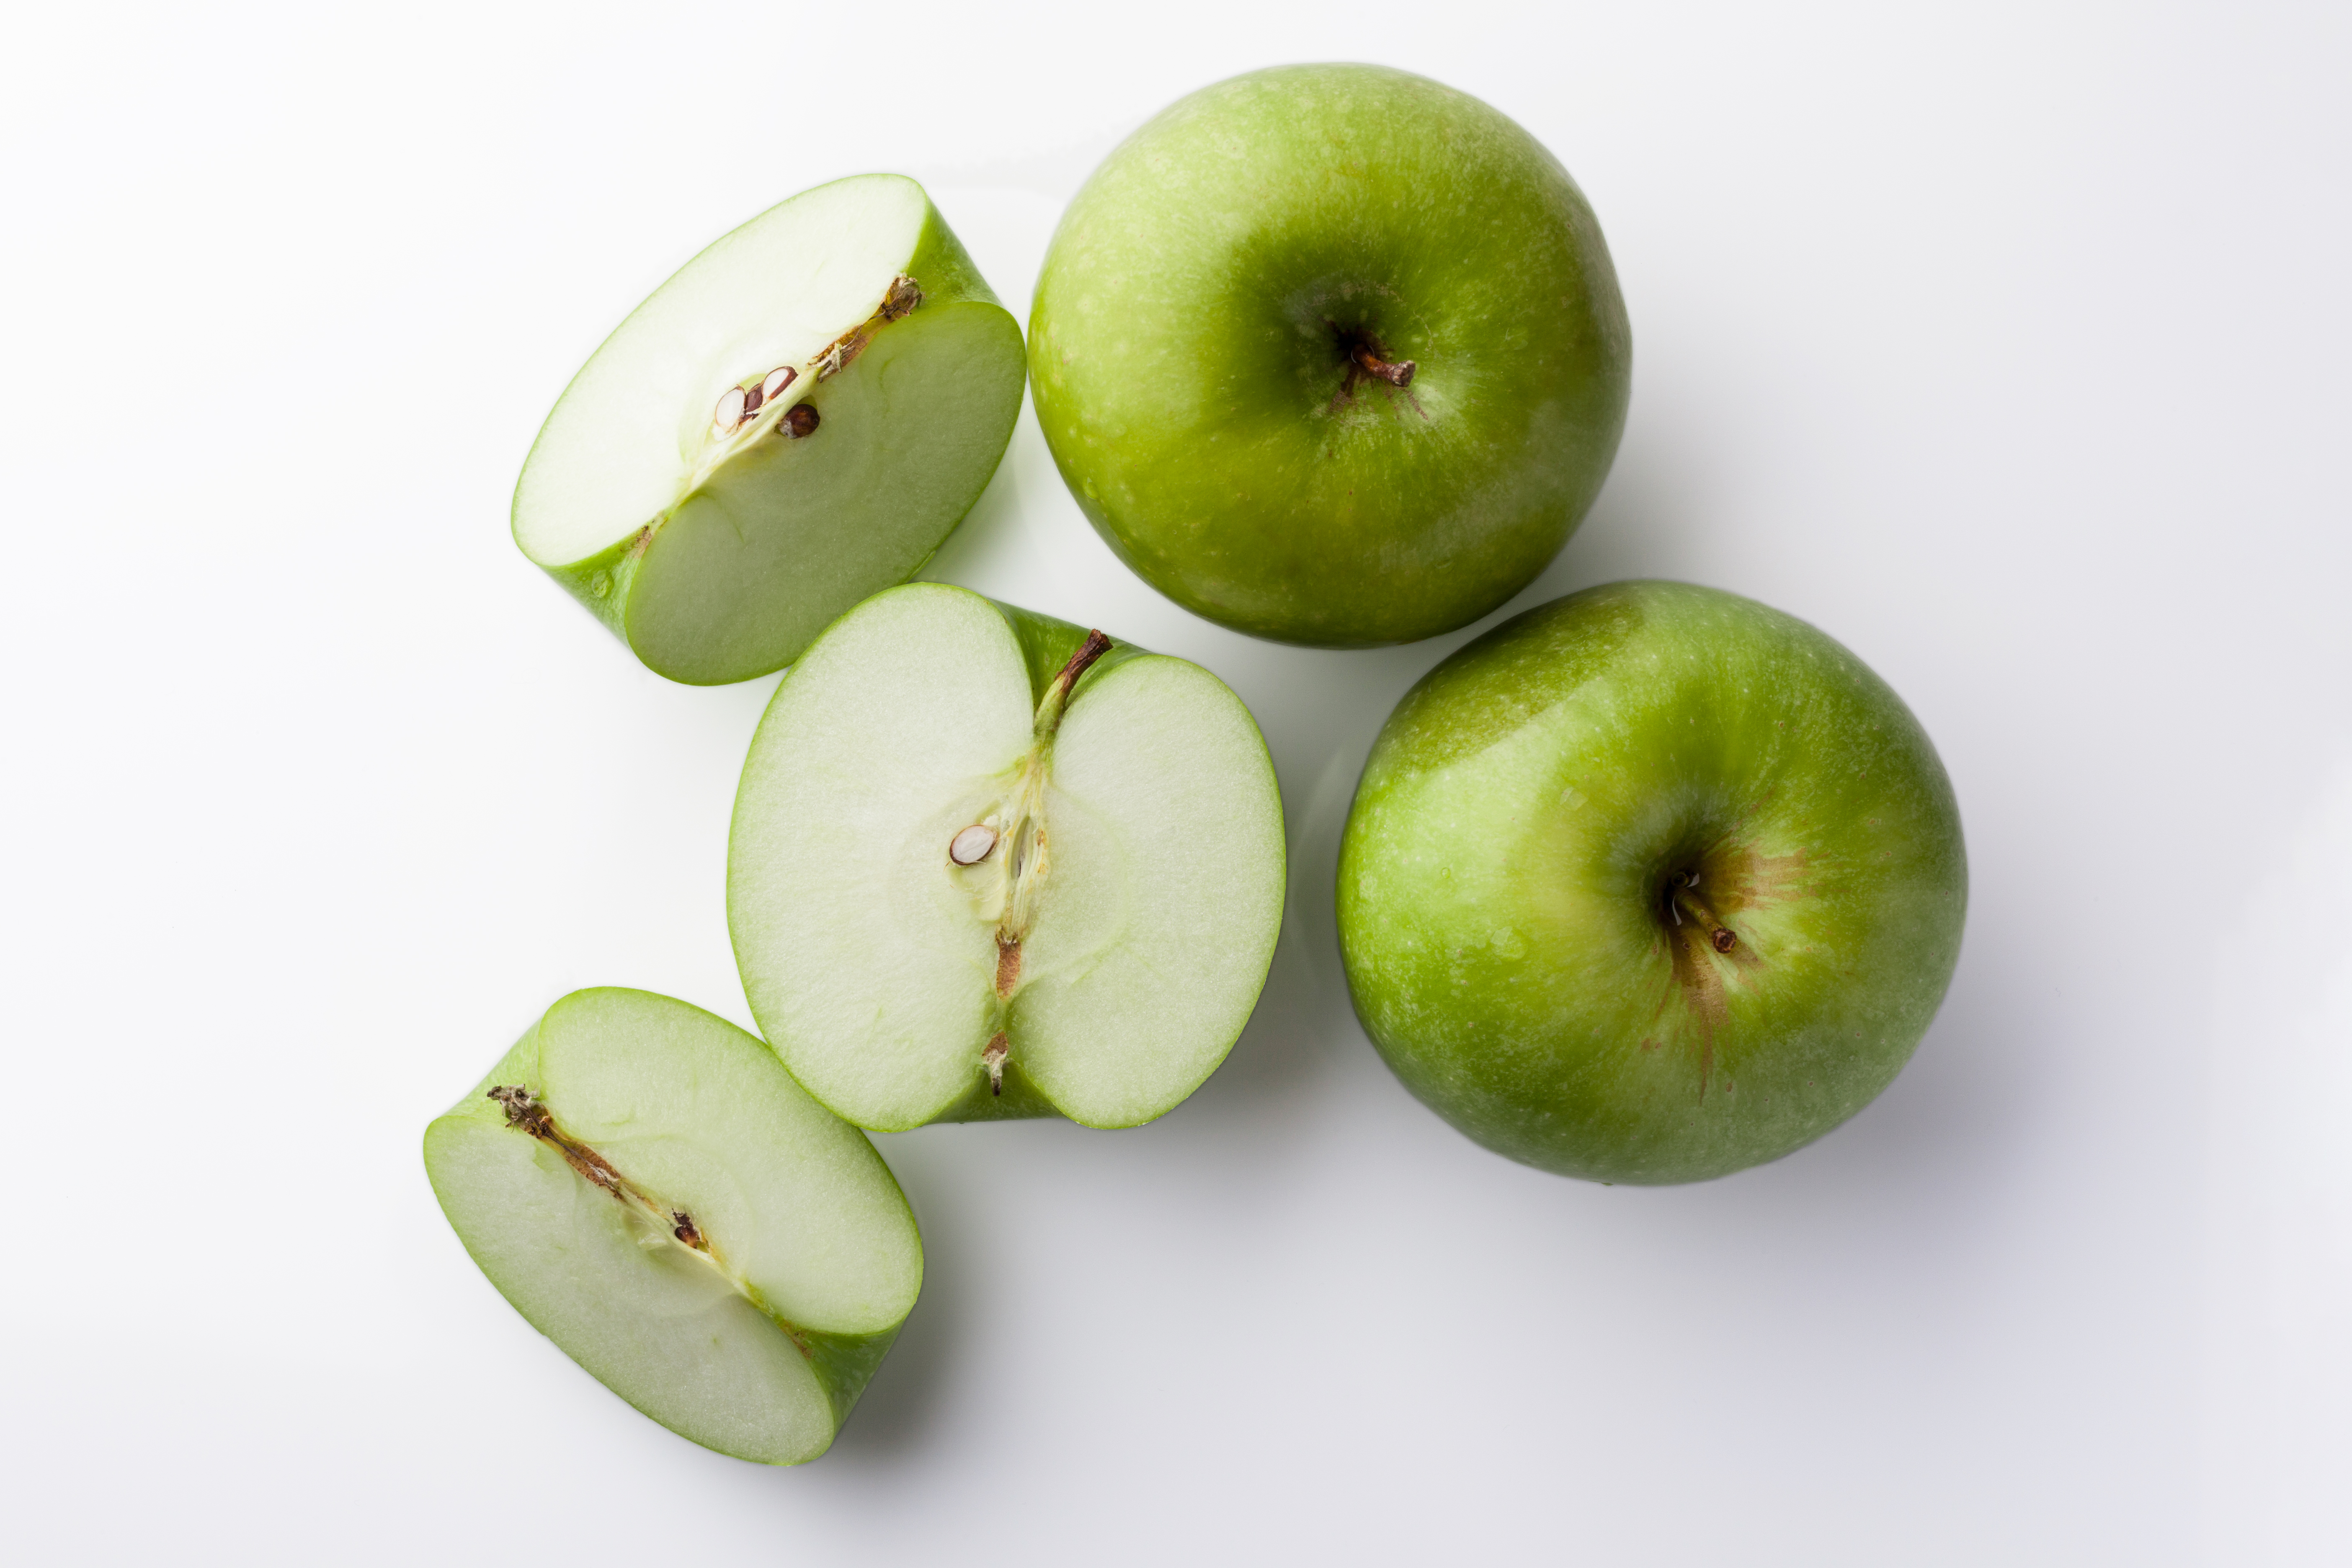 Pack Apples in Lunch Boxes: 4 Best Ways!